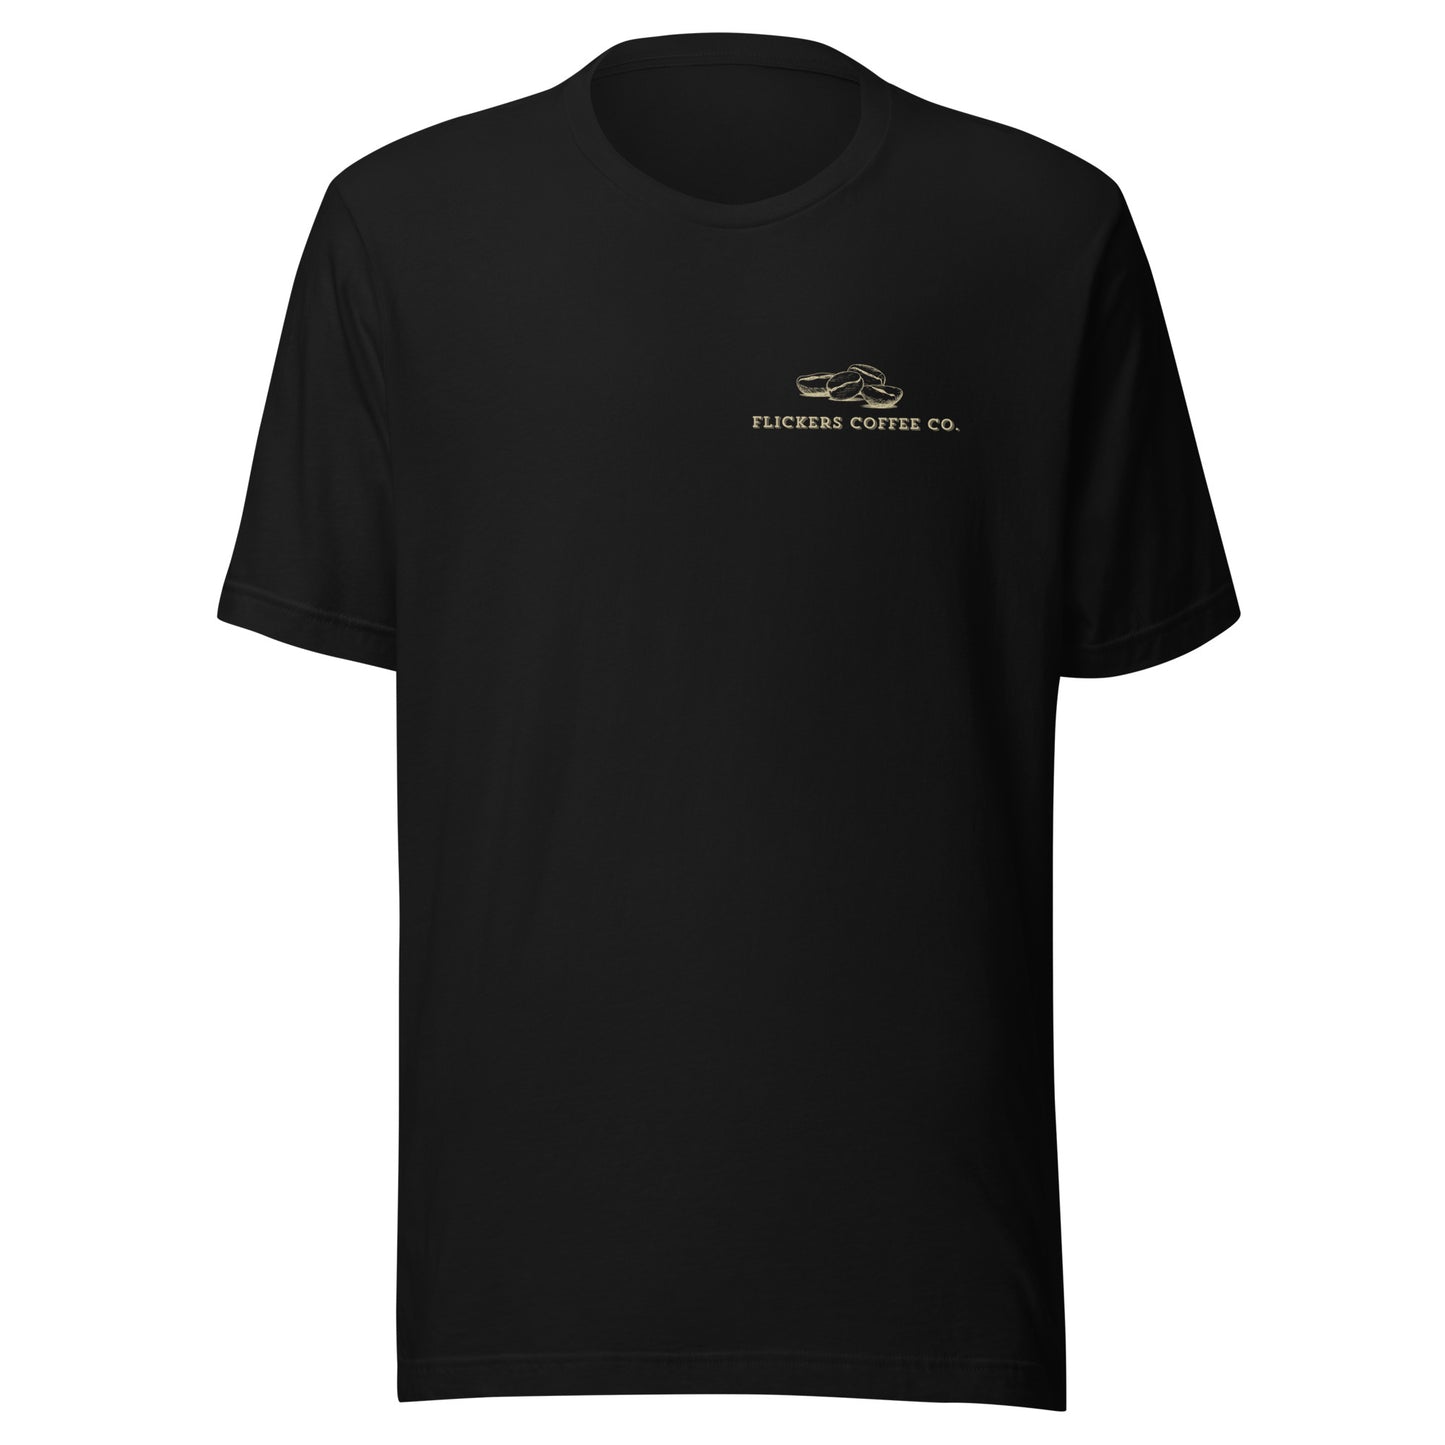 Bean Flickers Coffee Co Unisex t-shirt